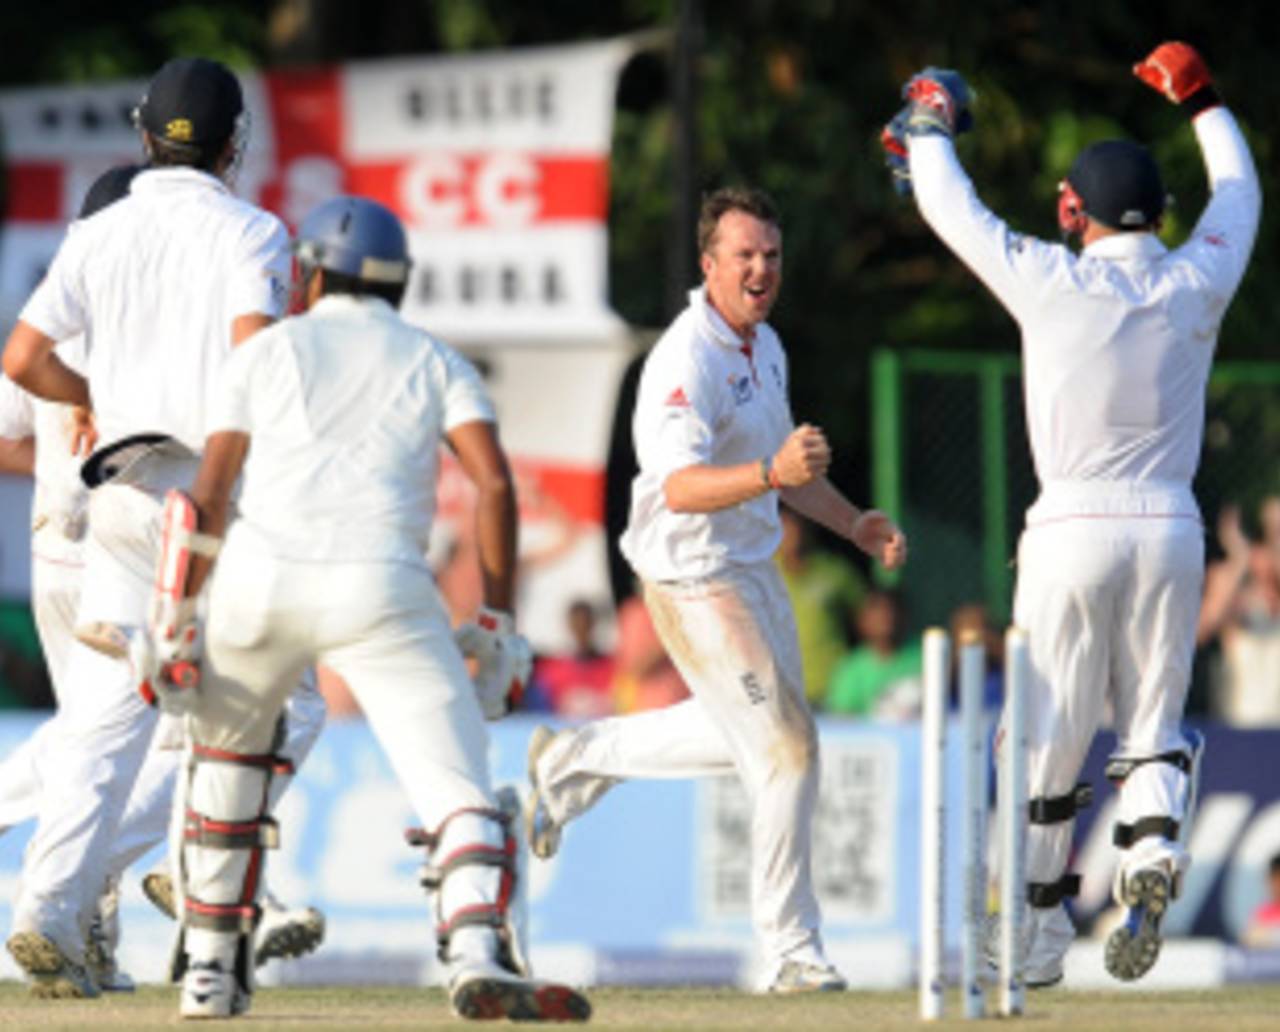 Graeme Swann took two wickets in the penultimate over of the day to lift England's hopes of victory&nbsp;&nbsp;&bull;&nbsp;&nbsp;AFP